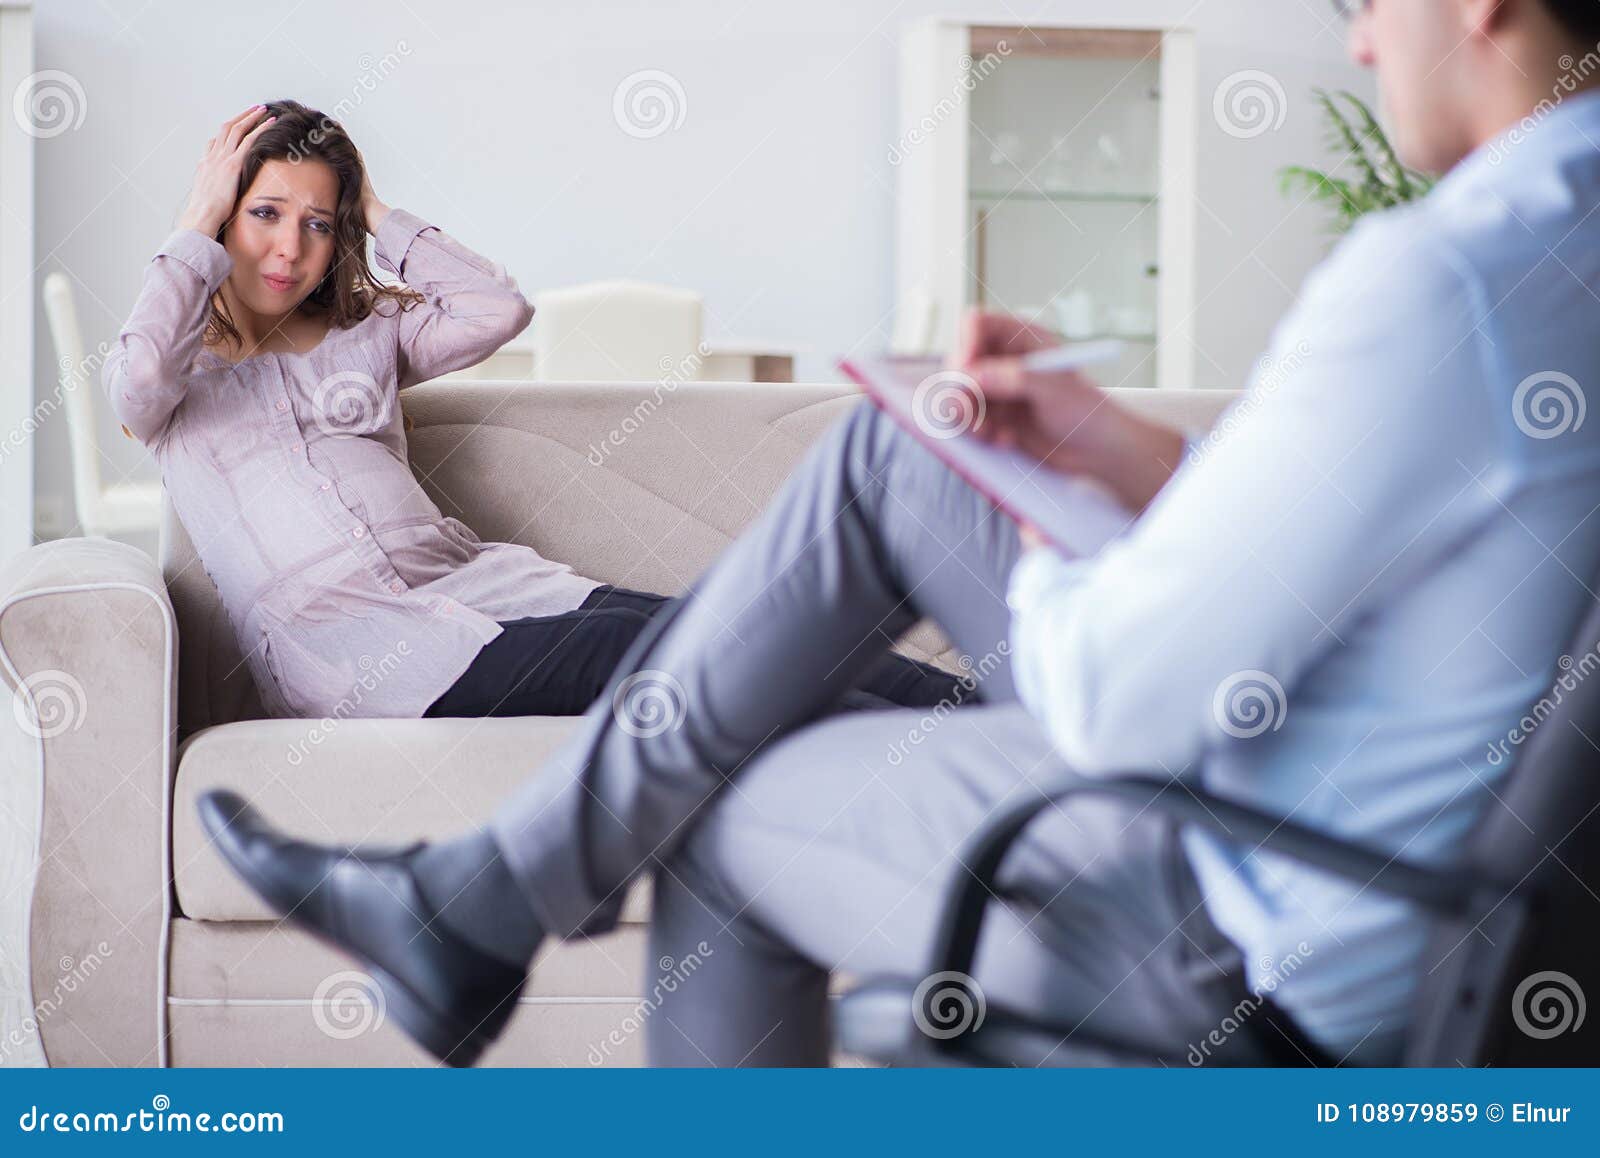 The Pregnant Woman Visiting Psychologist Doctor Stock Image Im